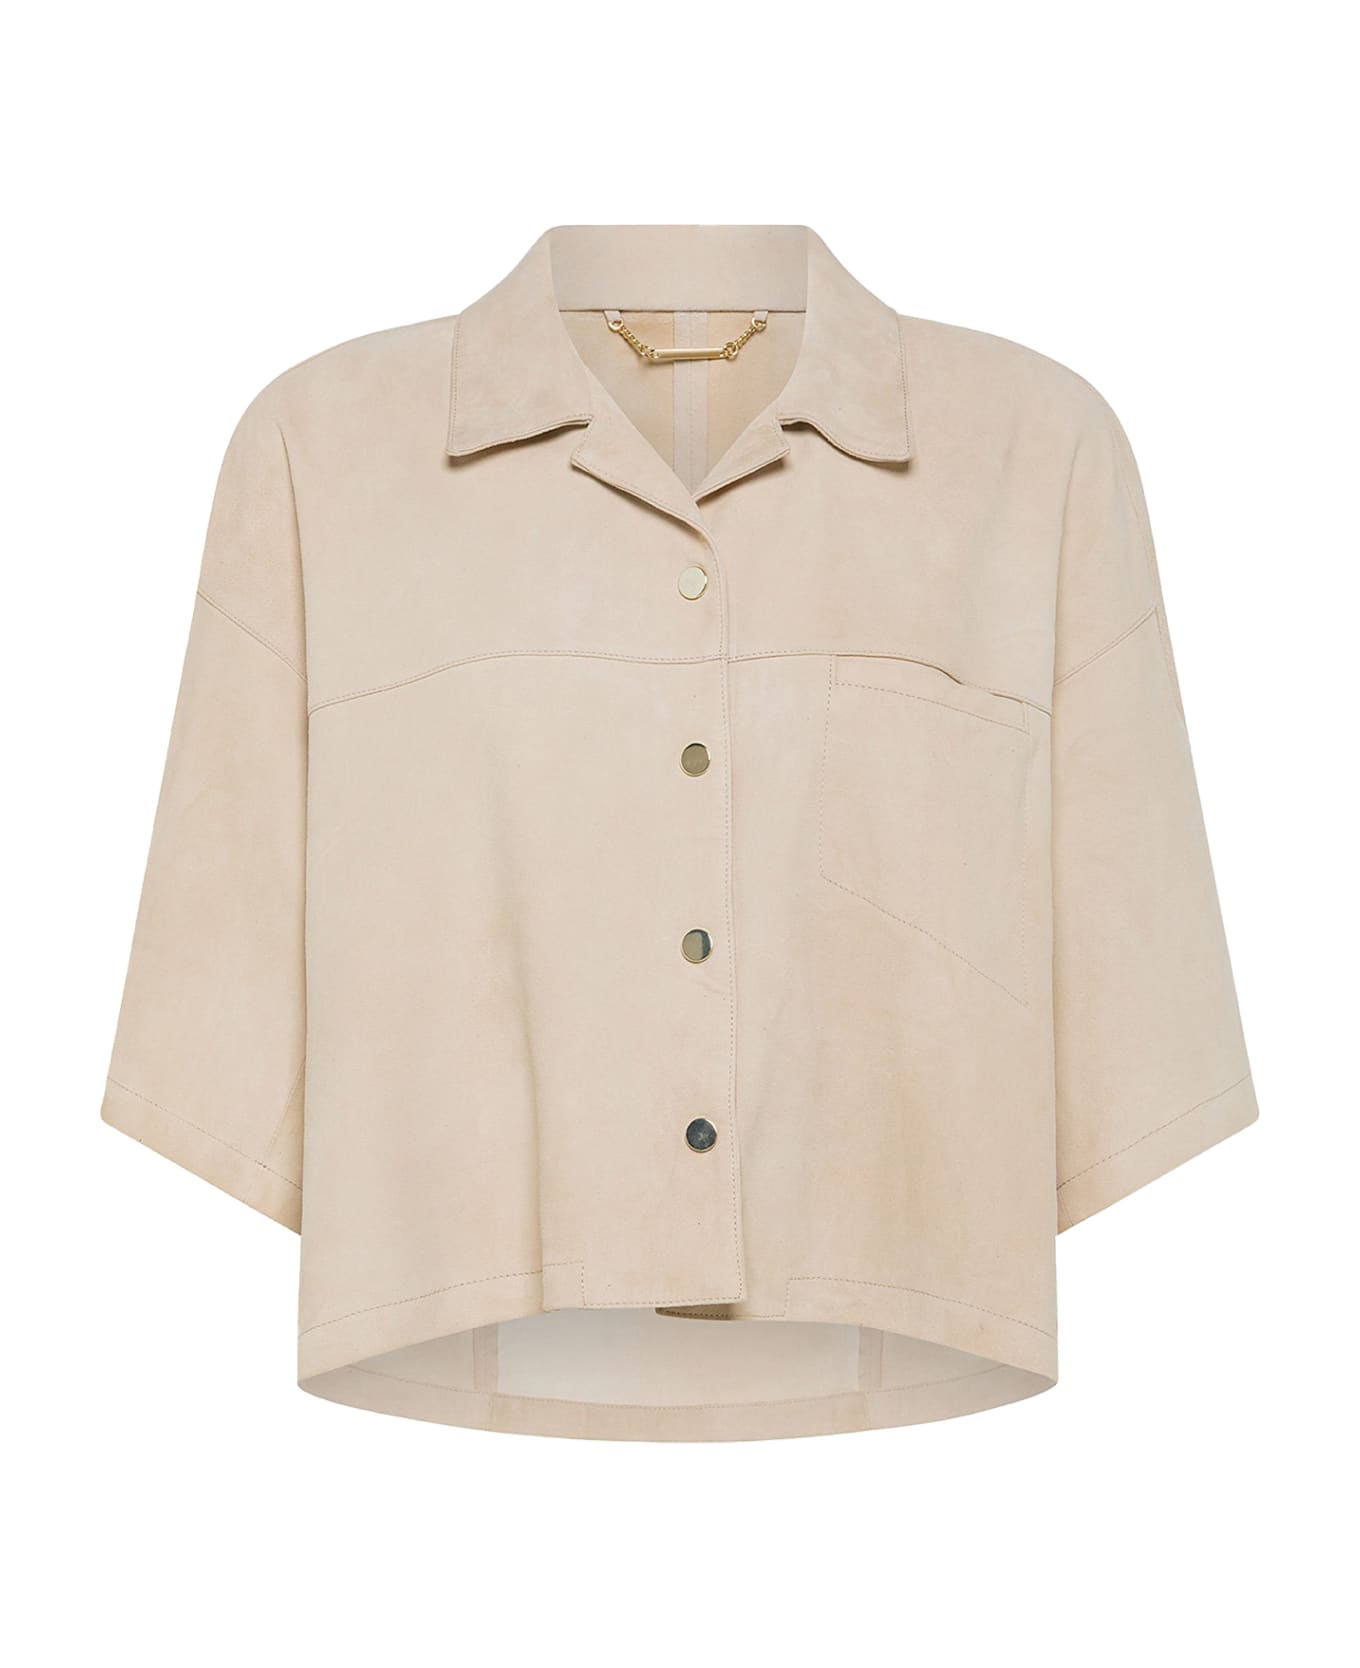 Seventy Beige Cape With Buttons - BEIGE